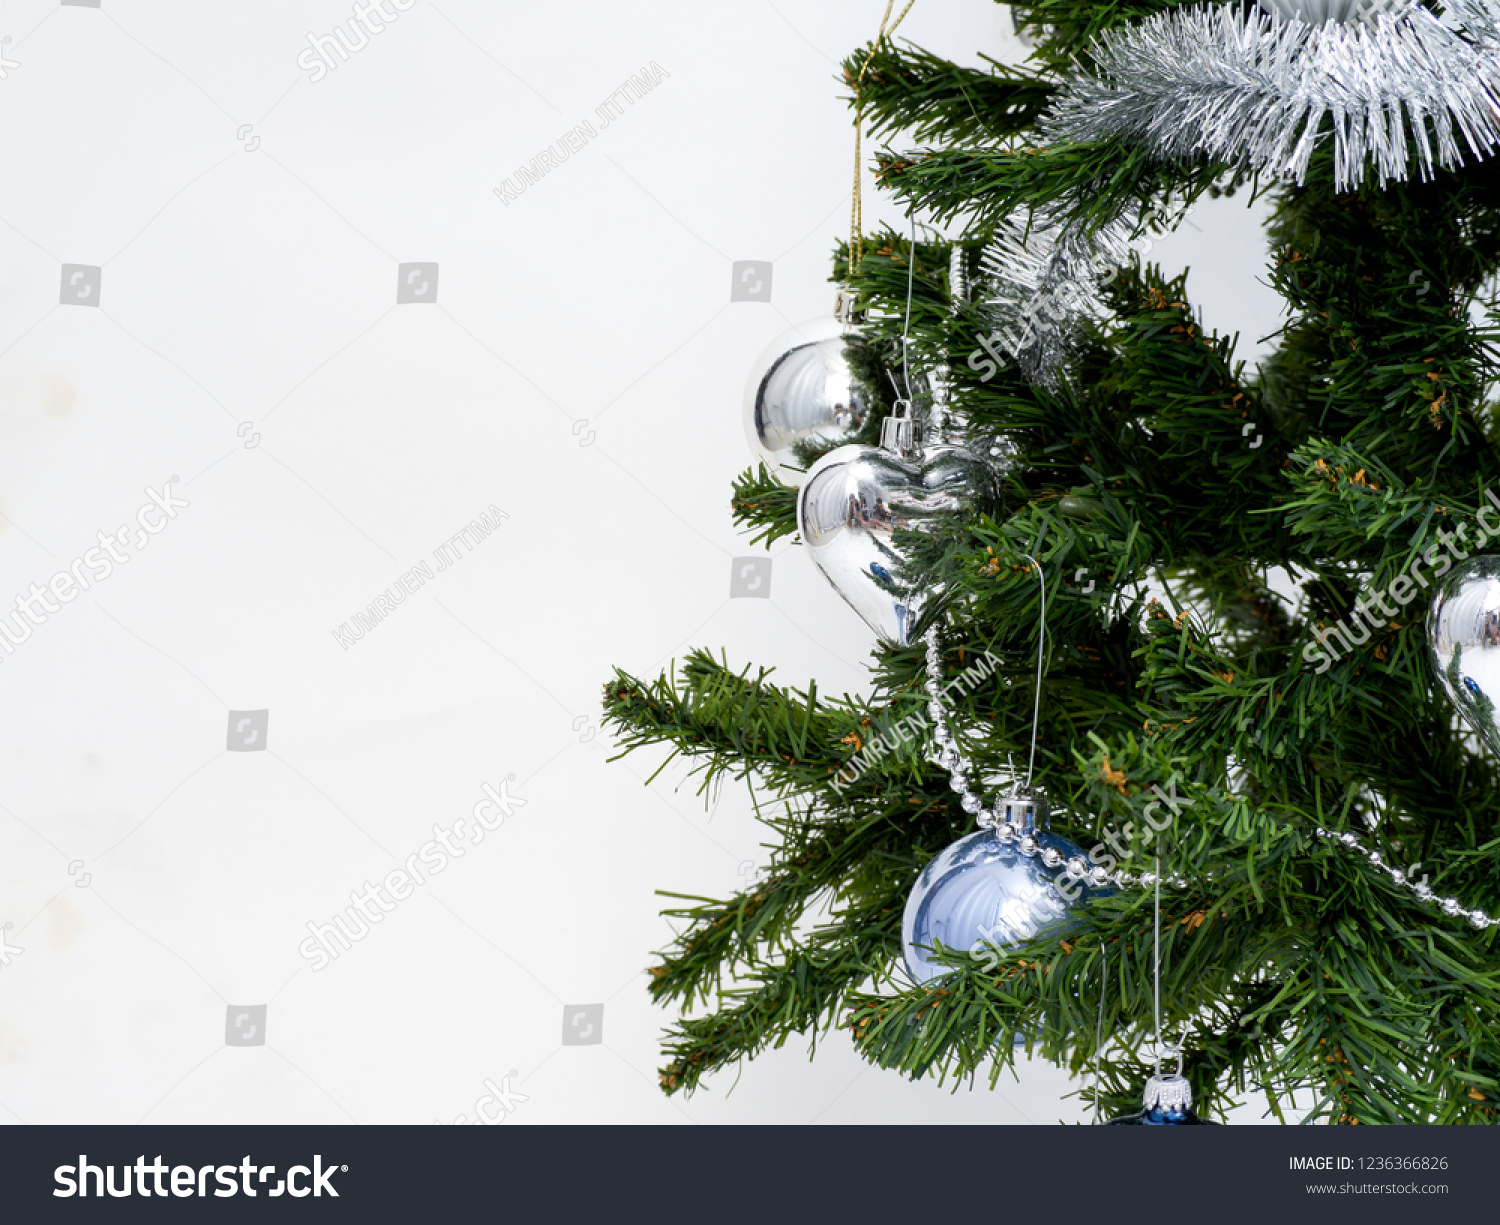 Silver Christmas decorations on a spruce branch on a white background #1236366826